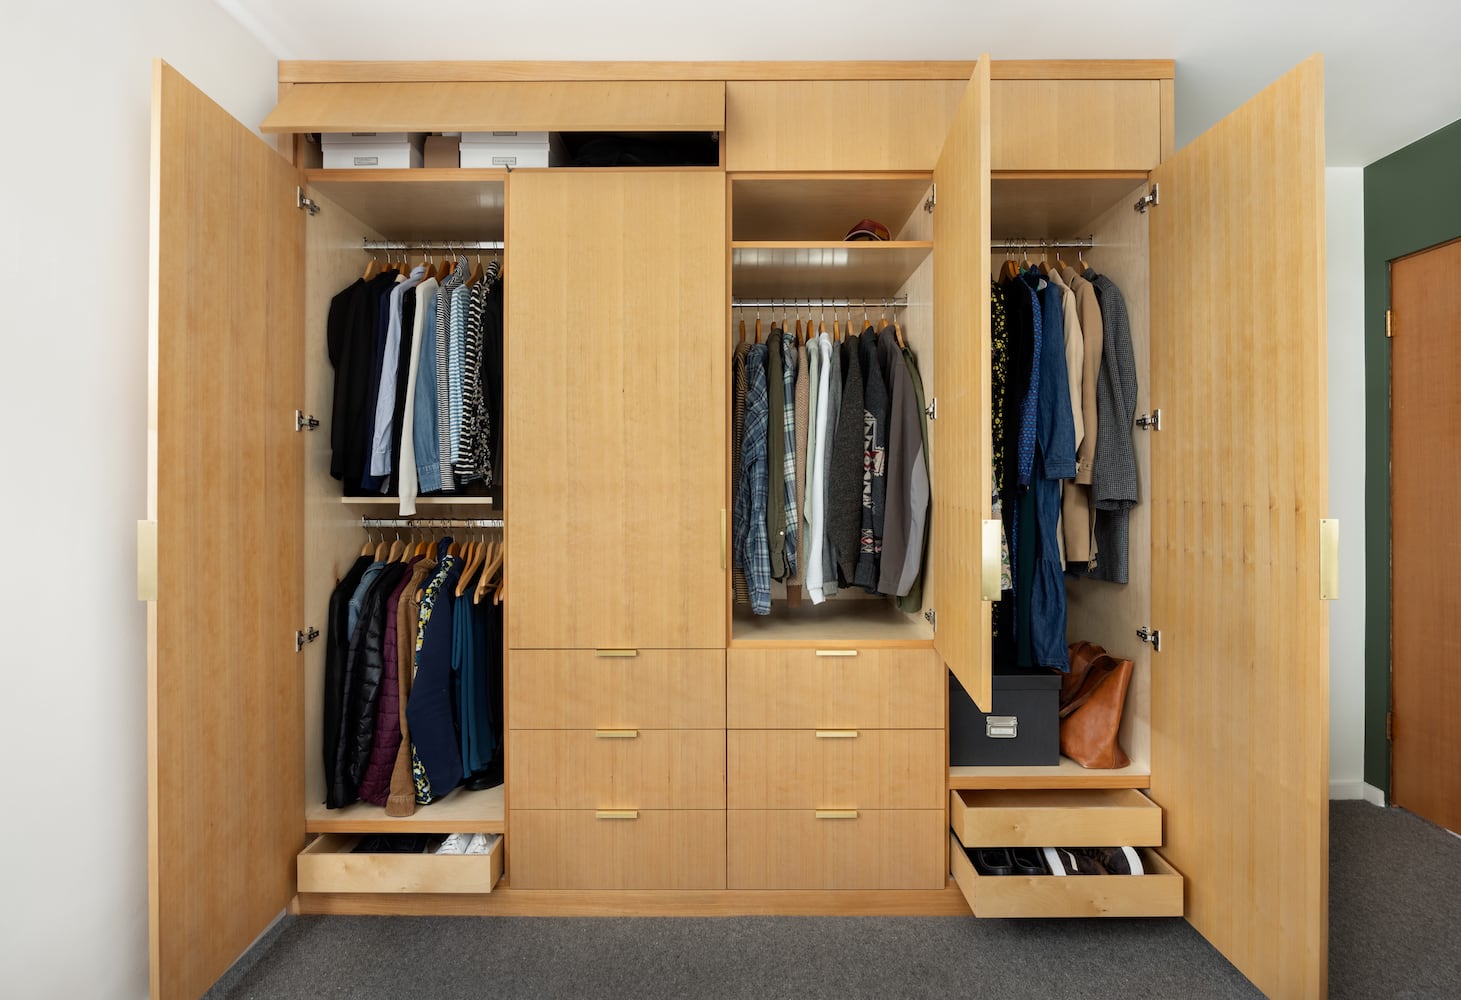 Custom closet with doors revealed to open in a number of ways, clever design